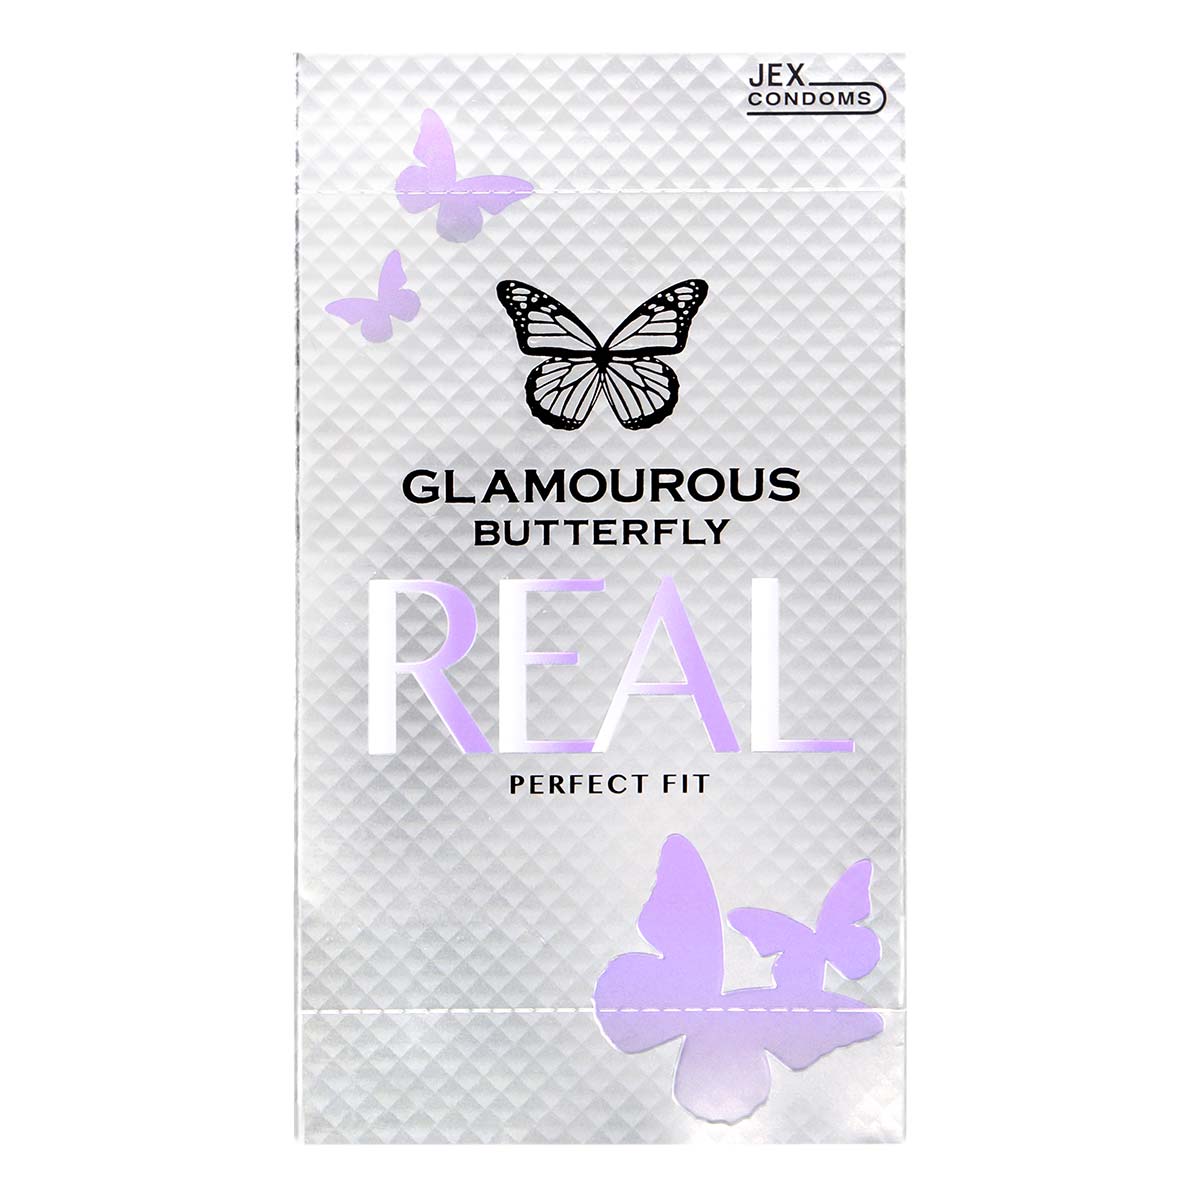 Glamourous Butterfly Real Perfect Fit 8's Pack Latex Condom-p_2